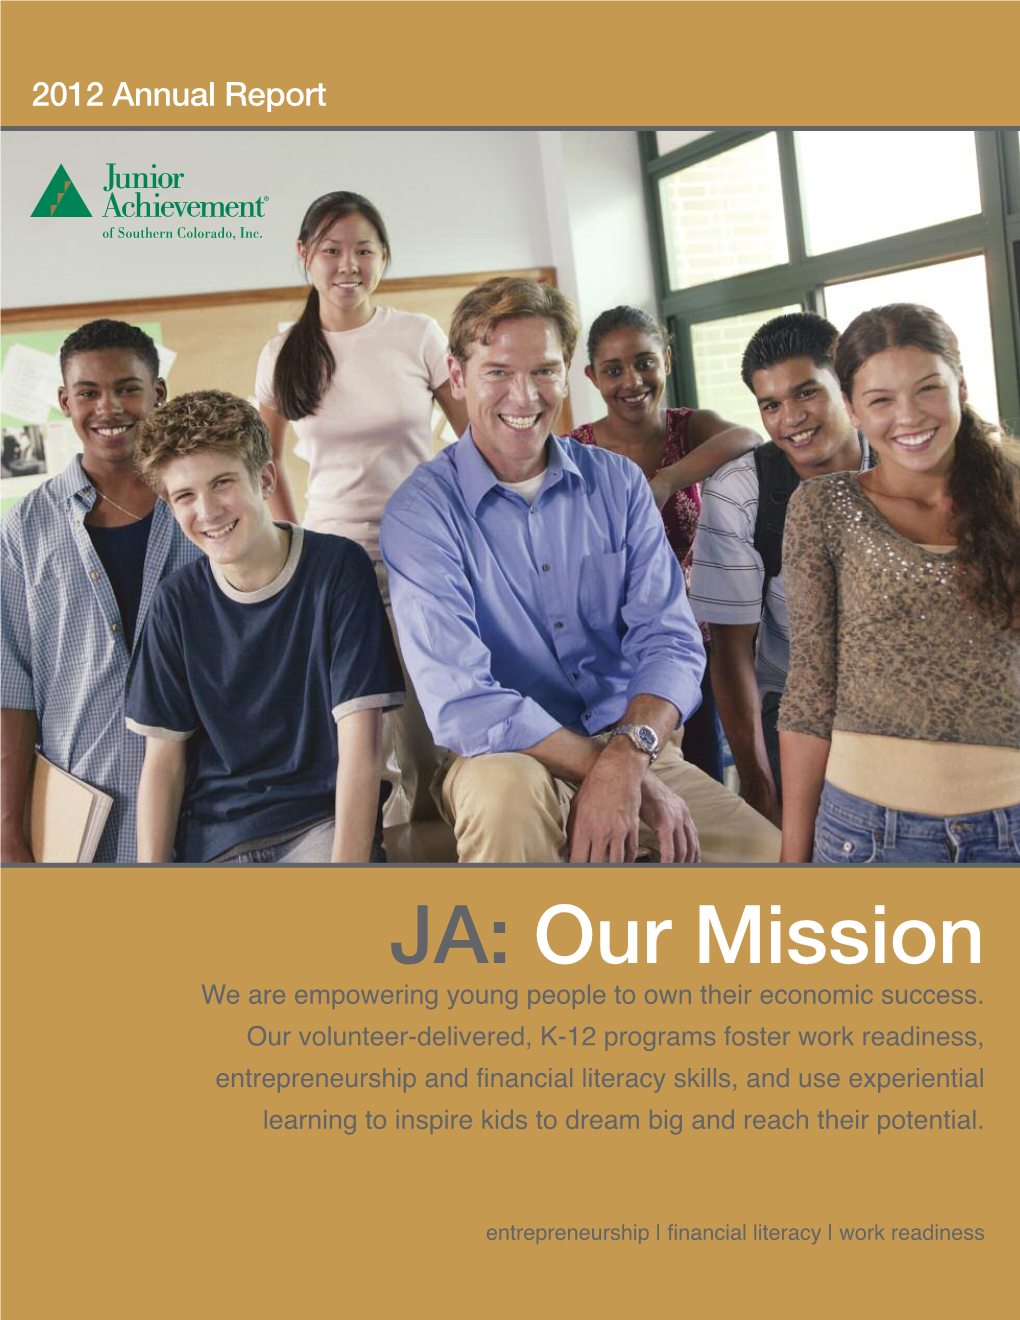 JA: Our Mission We Are Empowering Young People to Own Their Economic Success